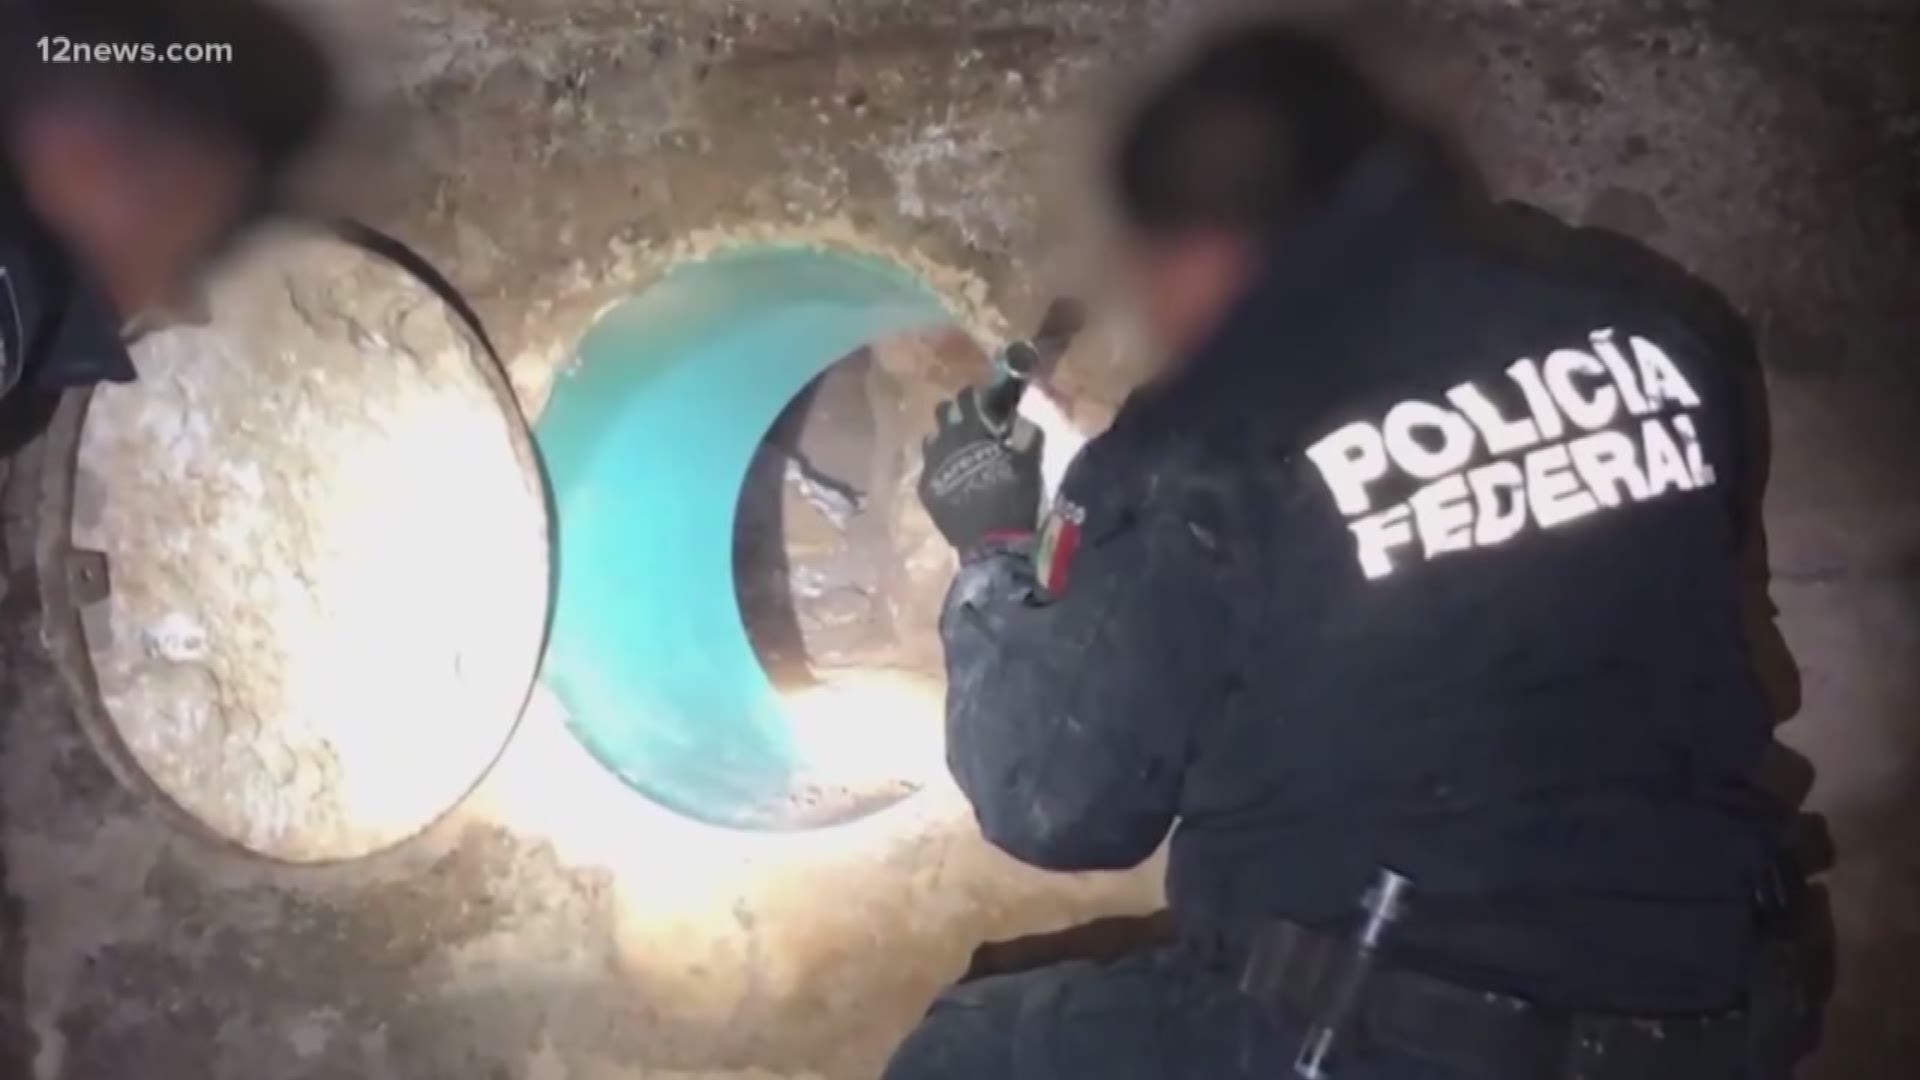 According to the video, Mexican authorities believe the tunnel was being used to smuggle drugs and people across the border in Nogales, Sonora.